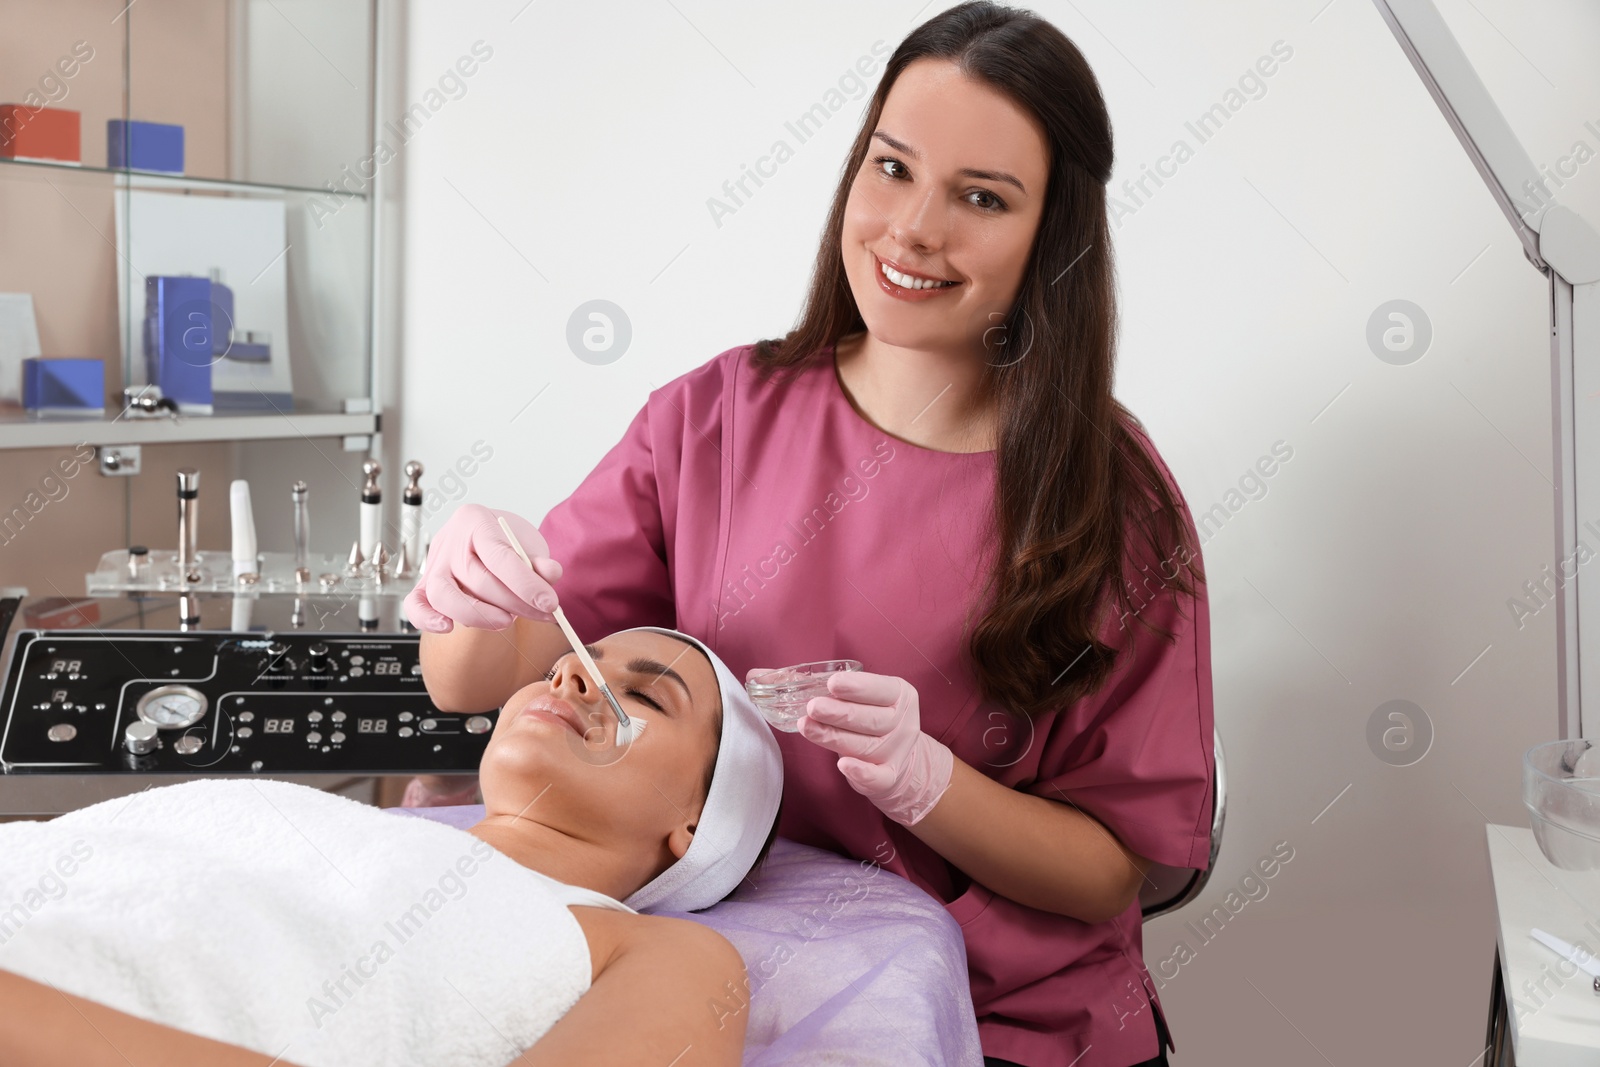 Photo of Young woman undergoing cosmetic procedure in beauty salon